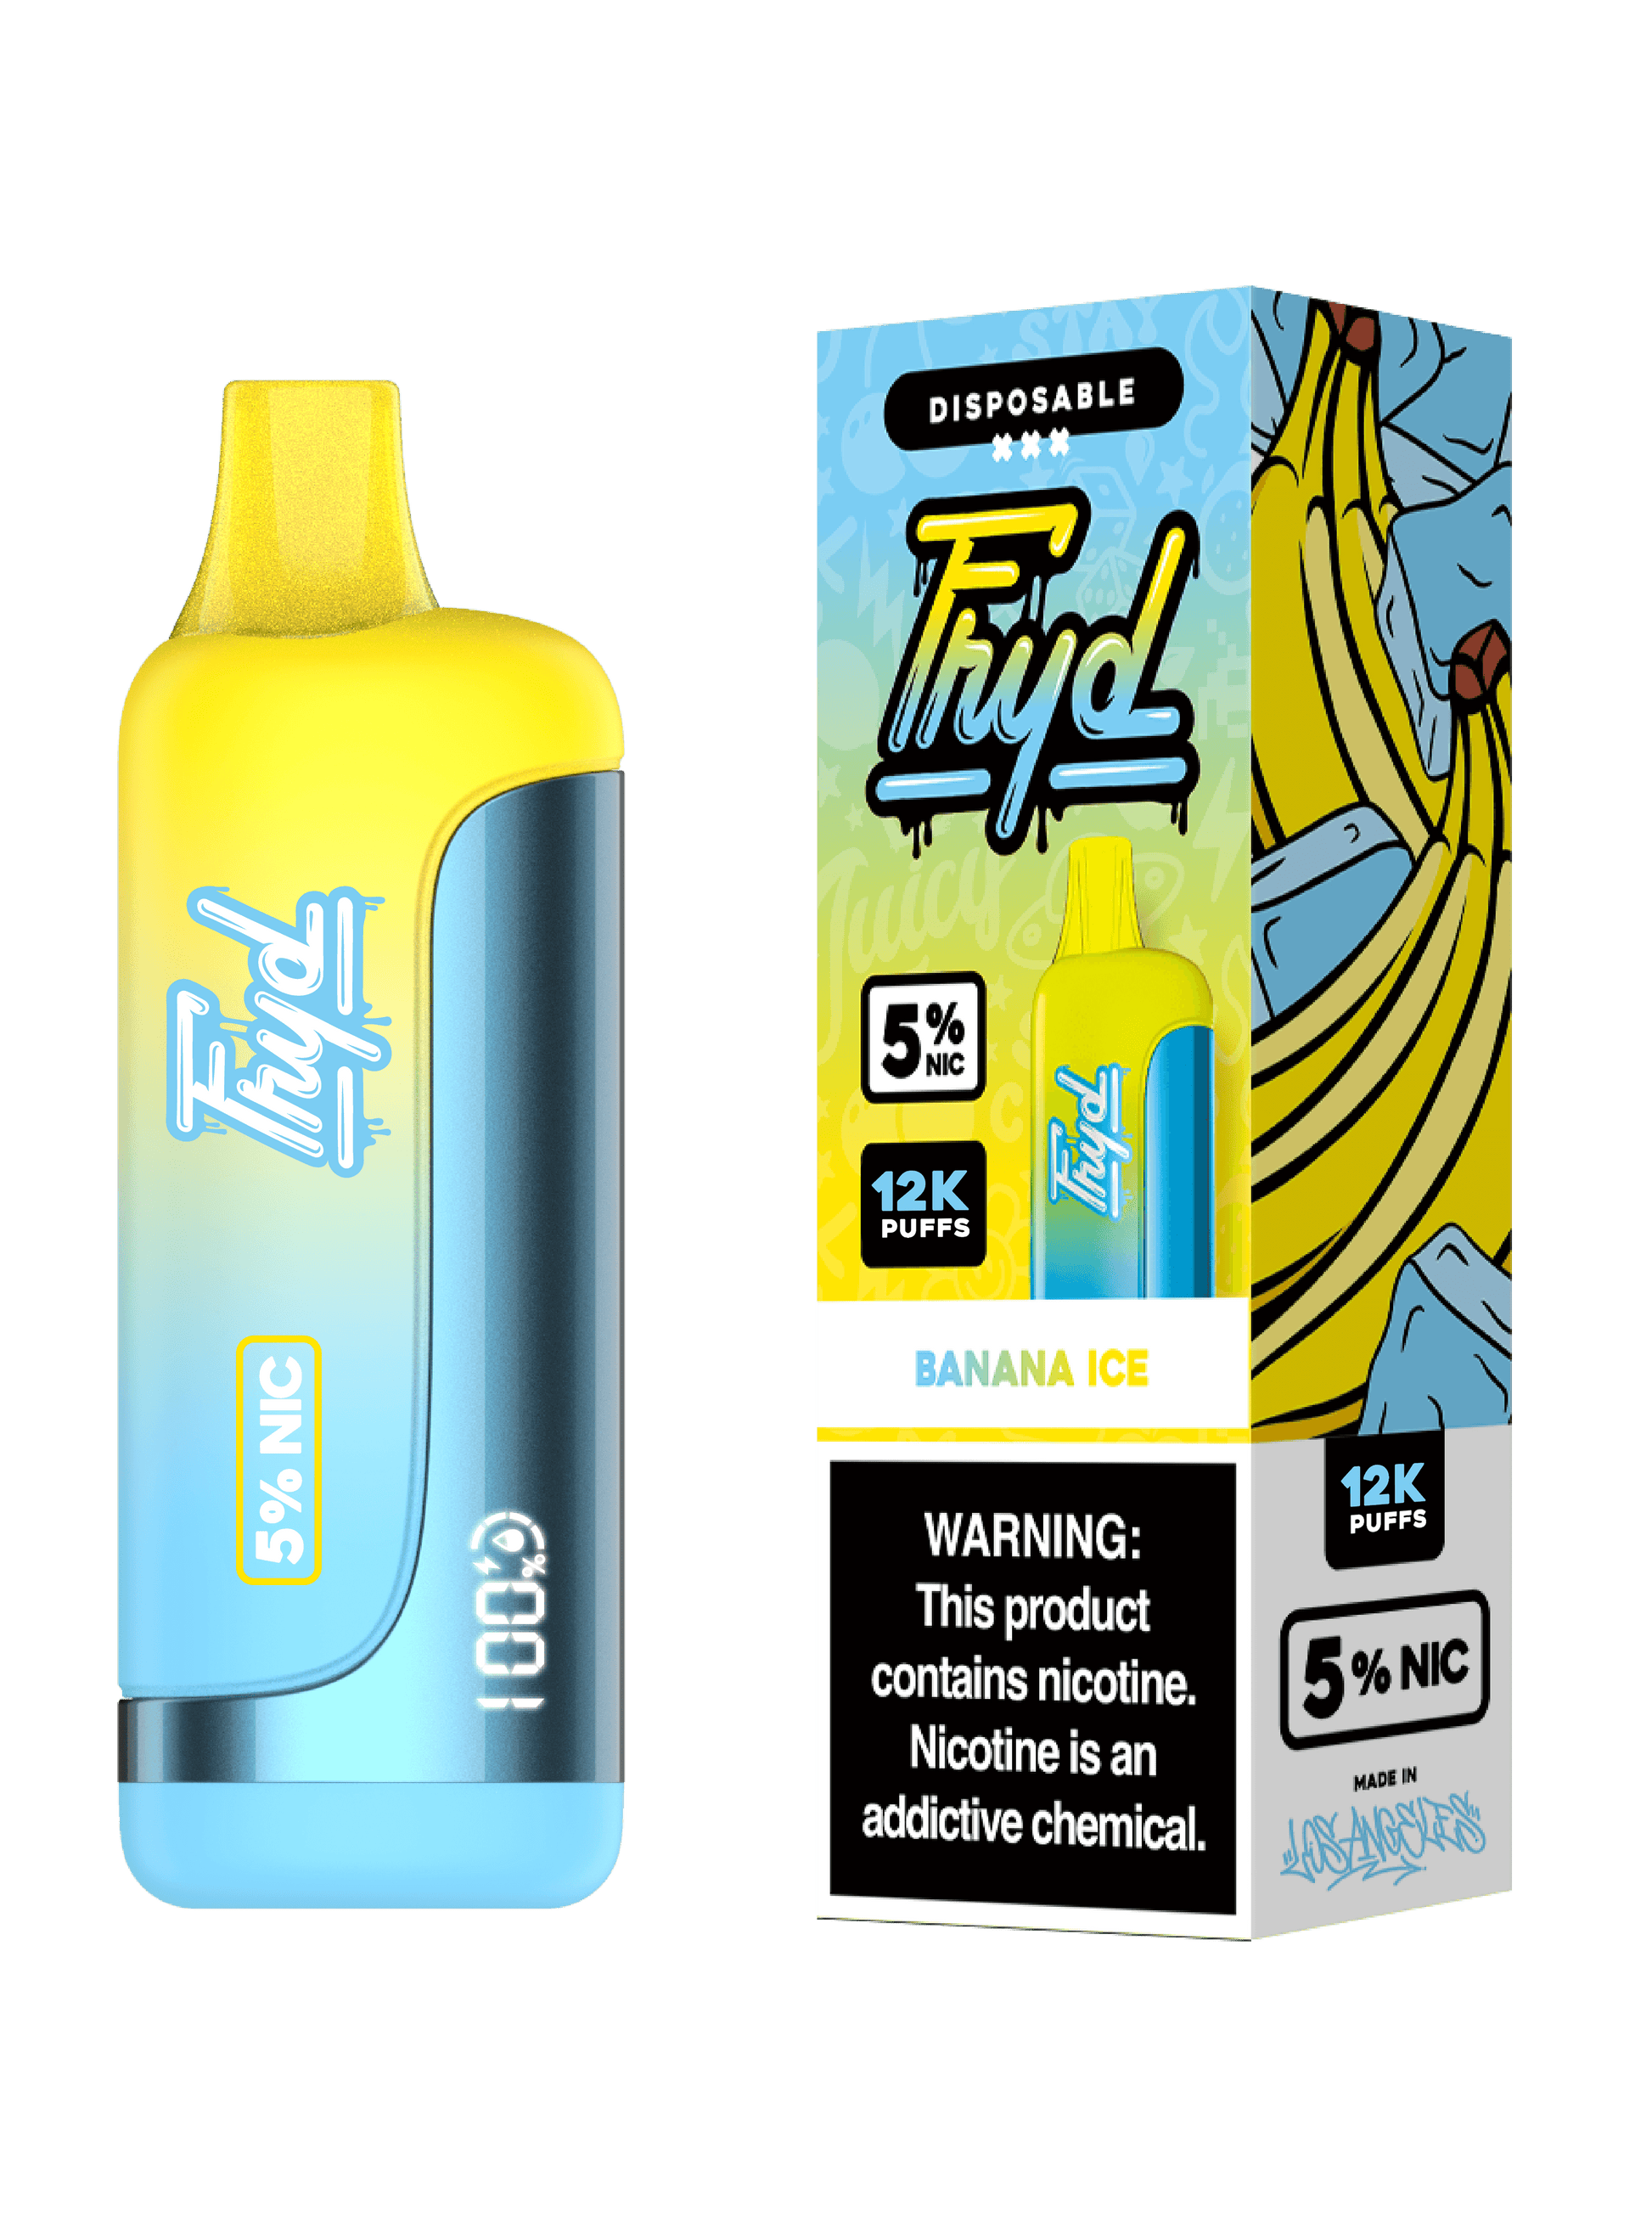 FRYD Disposable 12,0000 Puffs (17mL) 50mg Banana Ice with packaging